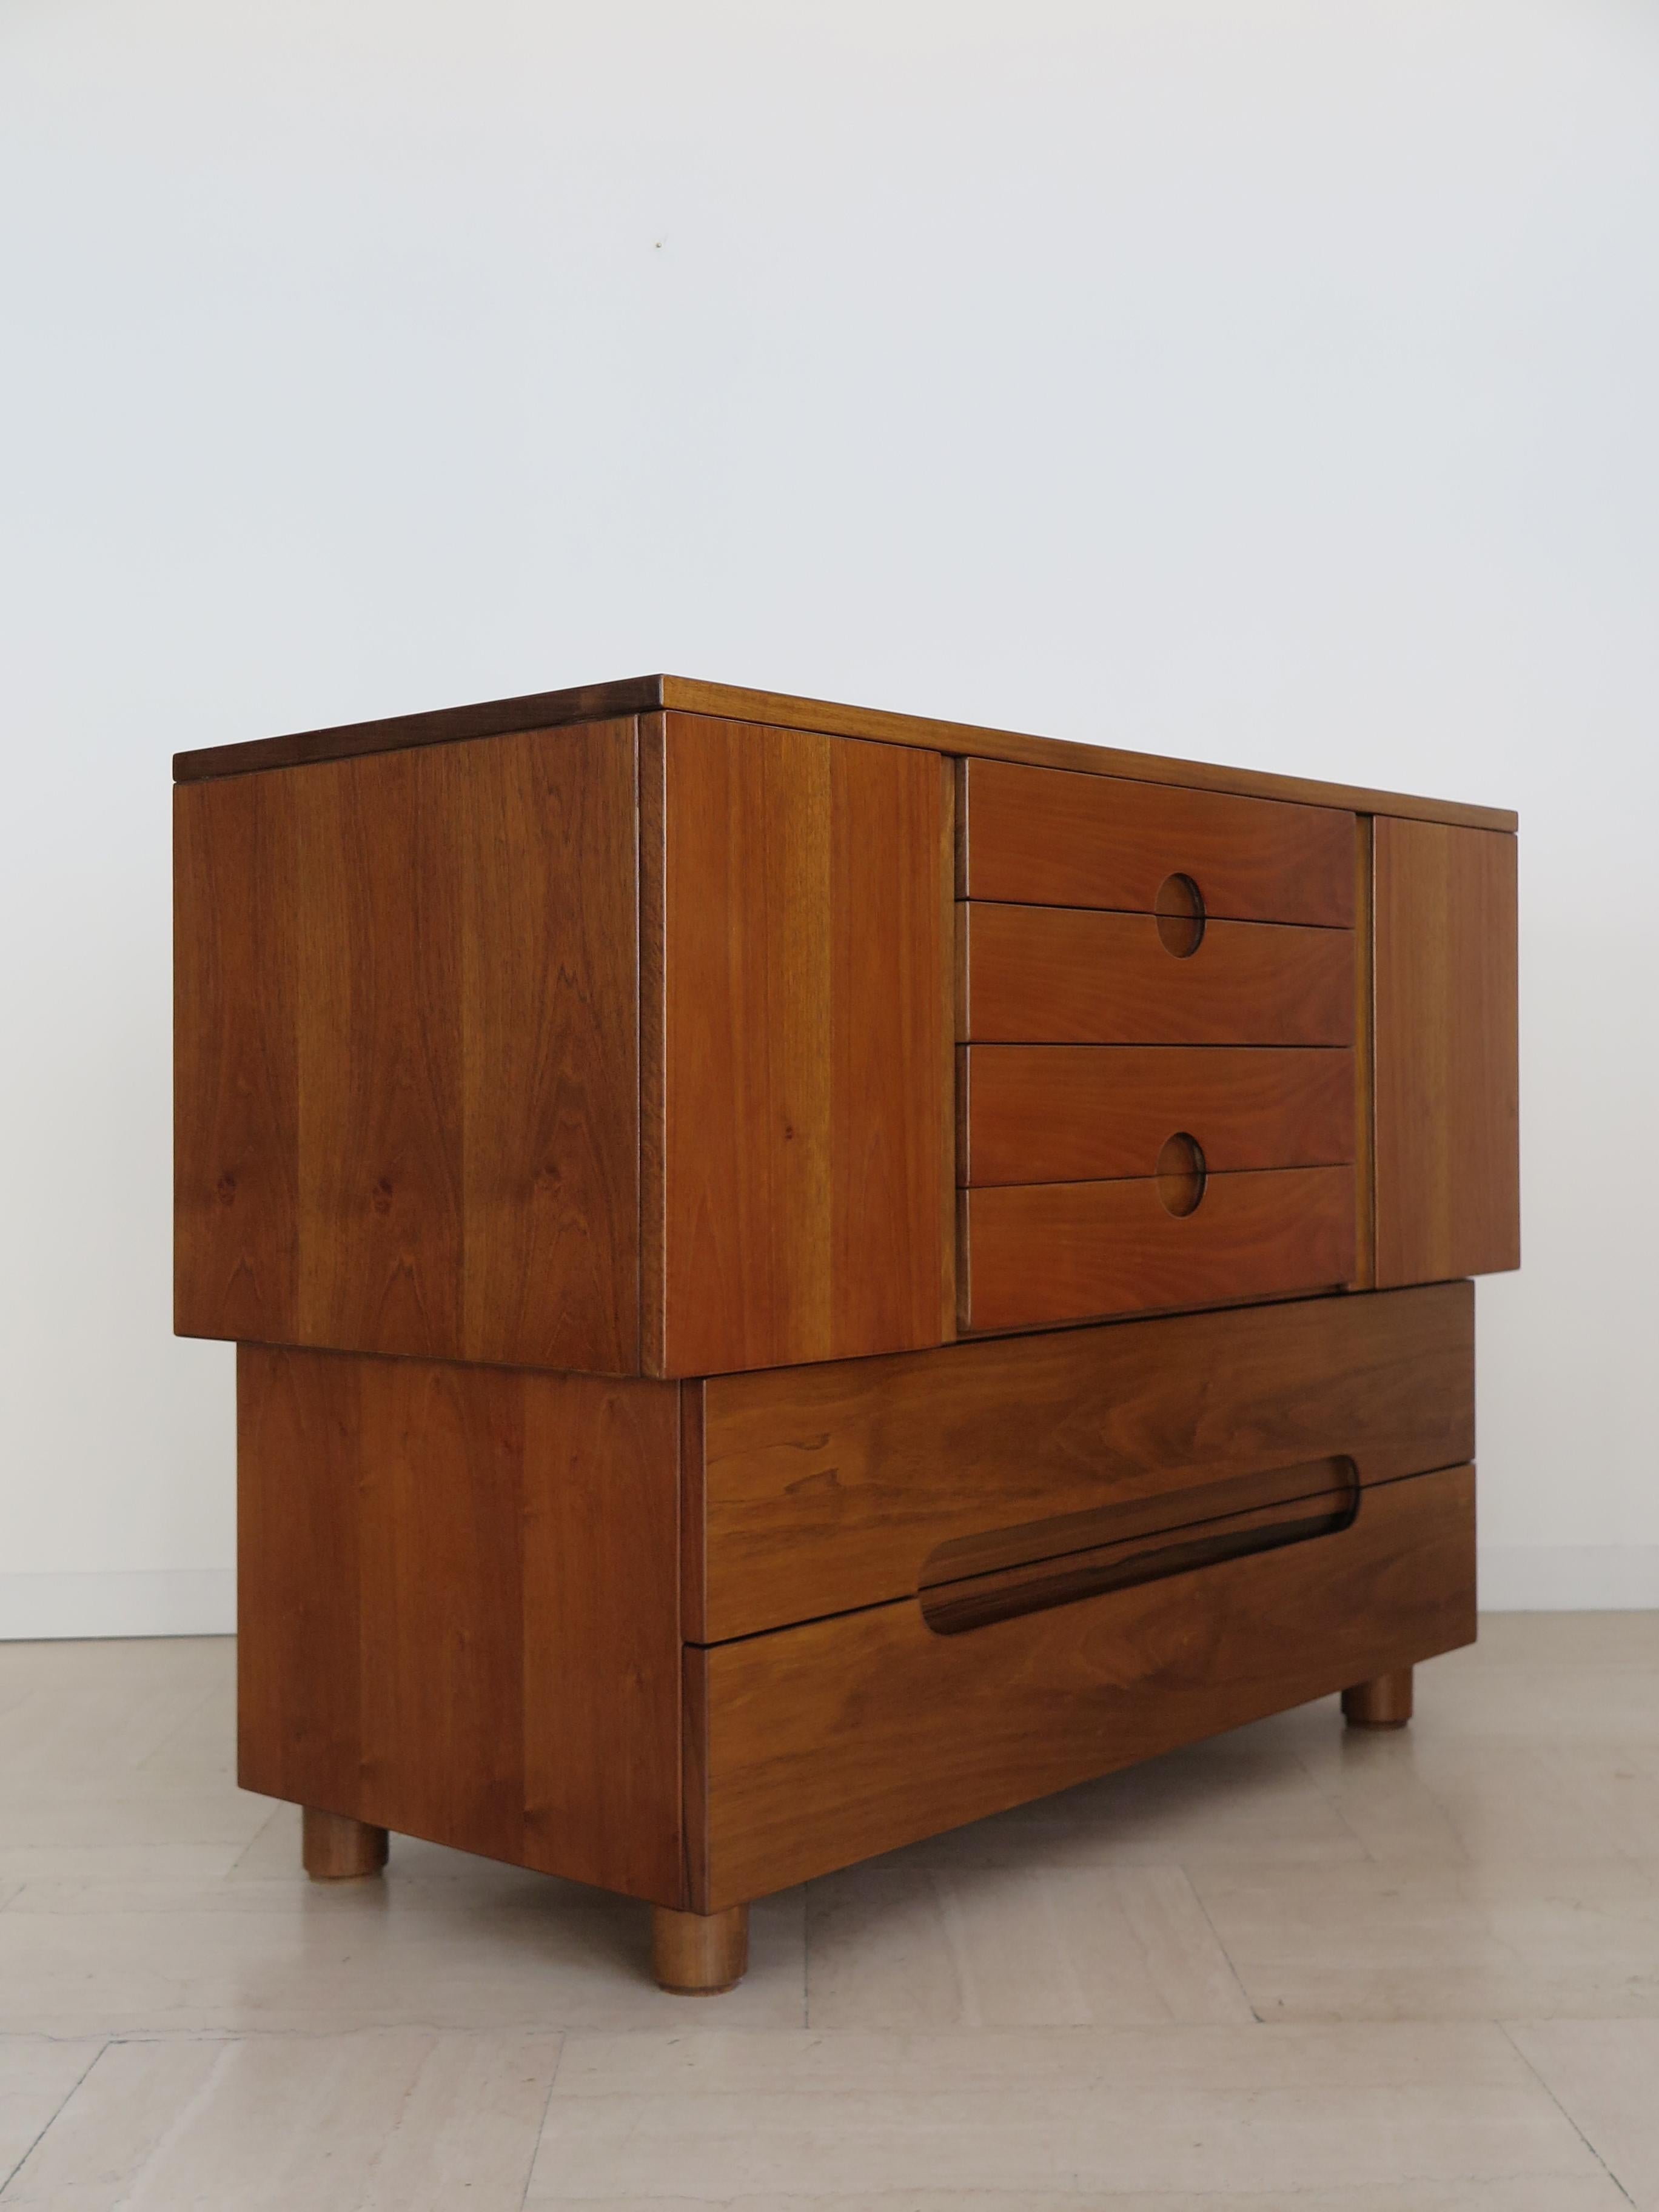 Walnut chest of drawers from the 